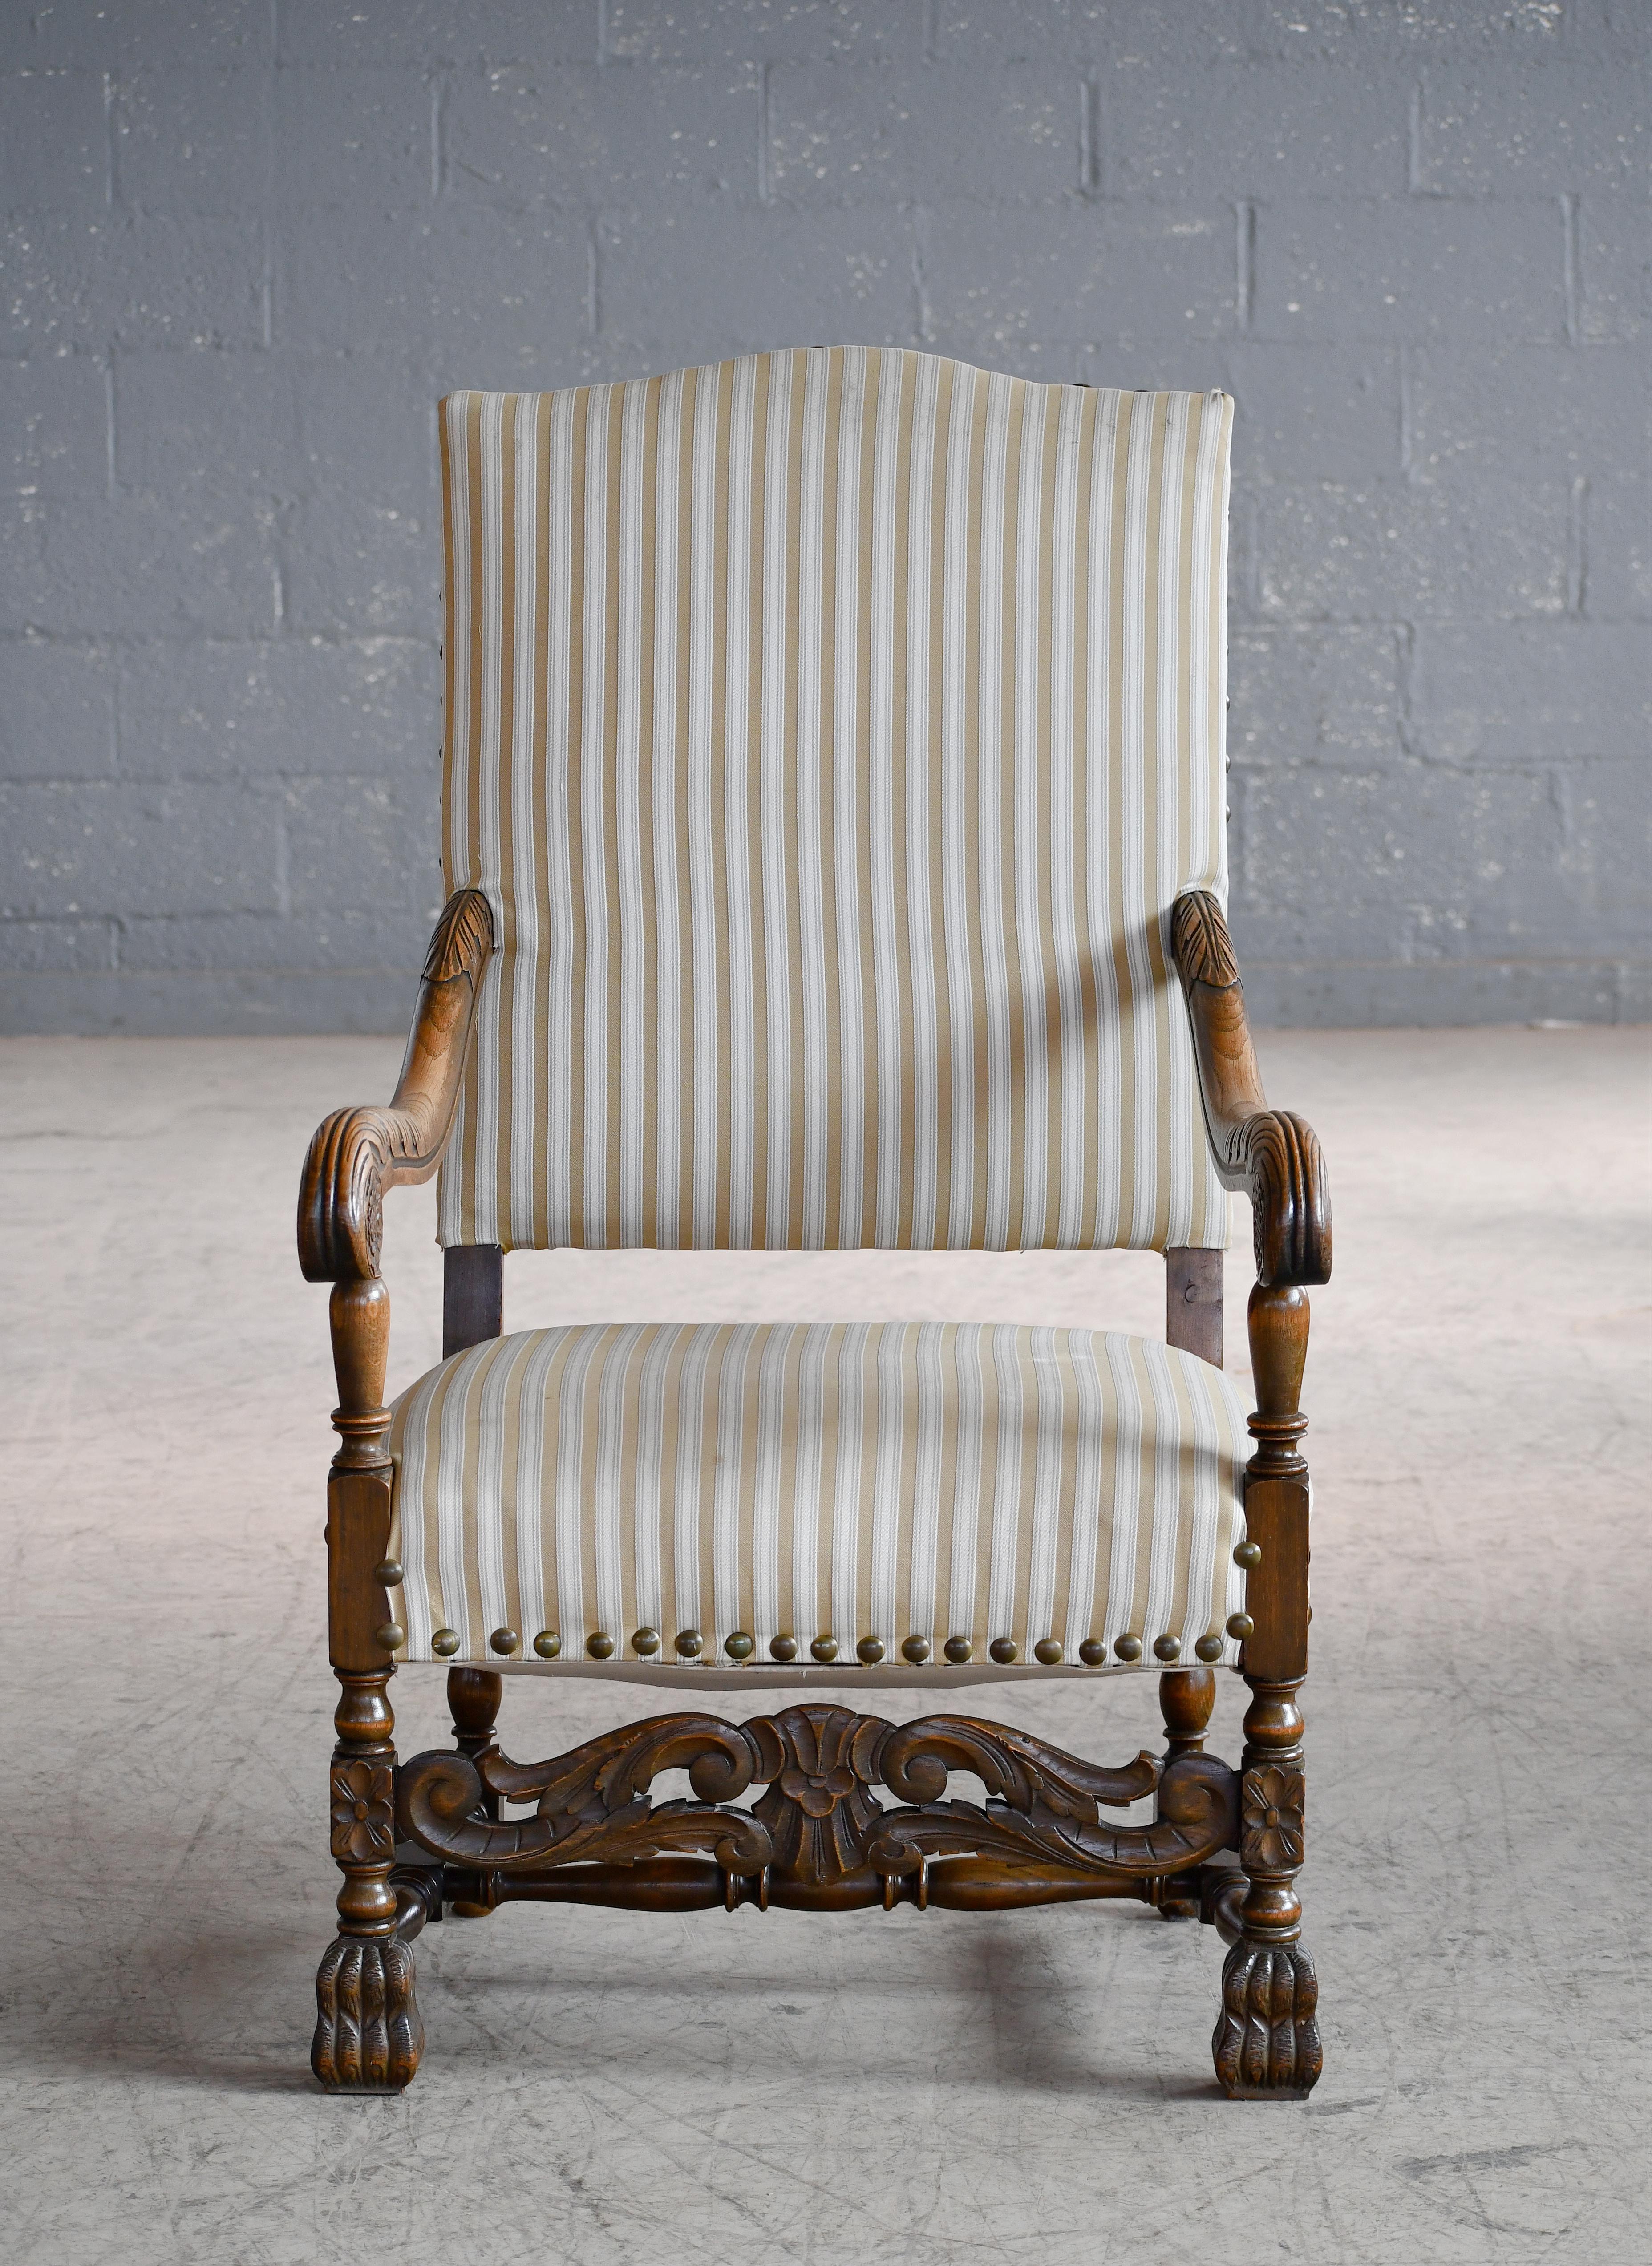 Beautiful carved oak throne chair made in Denmark, circa 1900. Solid and Sturdy. Re-upholstered at a later date and fabric in good clean usable condition. Solid and sturdy and overall very good condition with nice wear and patina to the armrests.